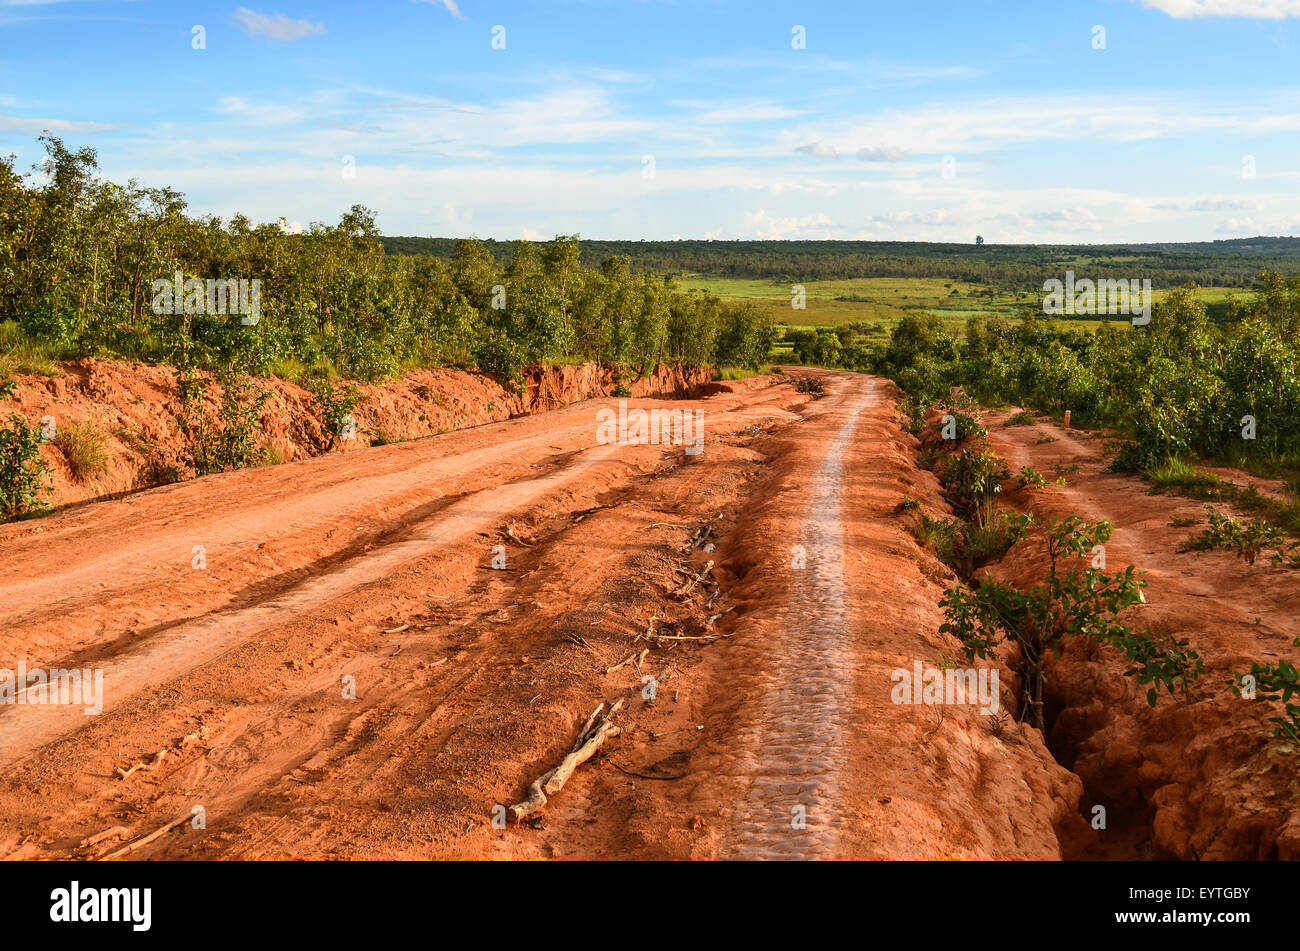 Dirt road of red mud / laterite in Angola near Chicuma Stock Photo